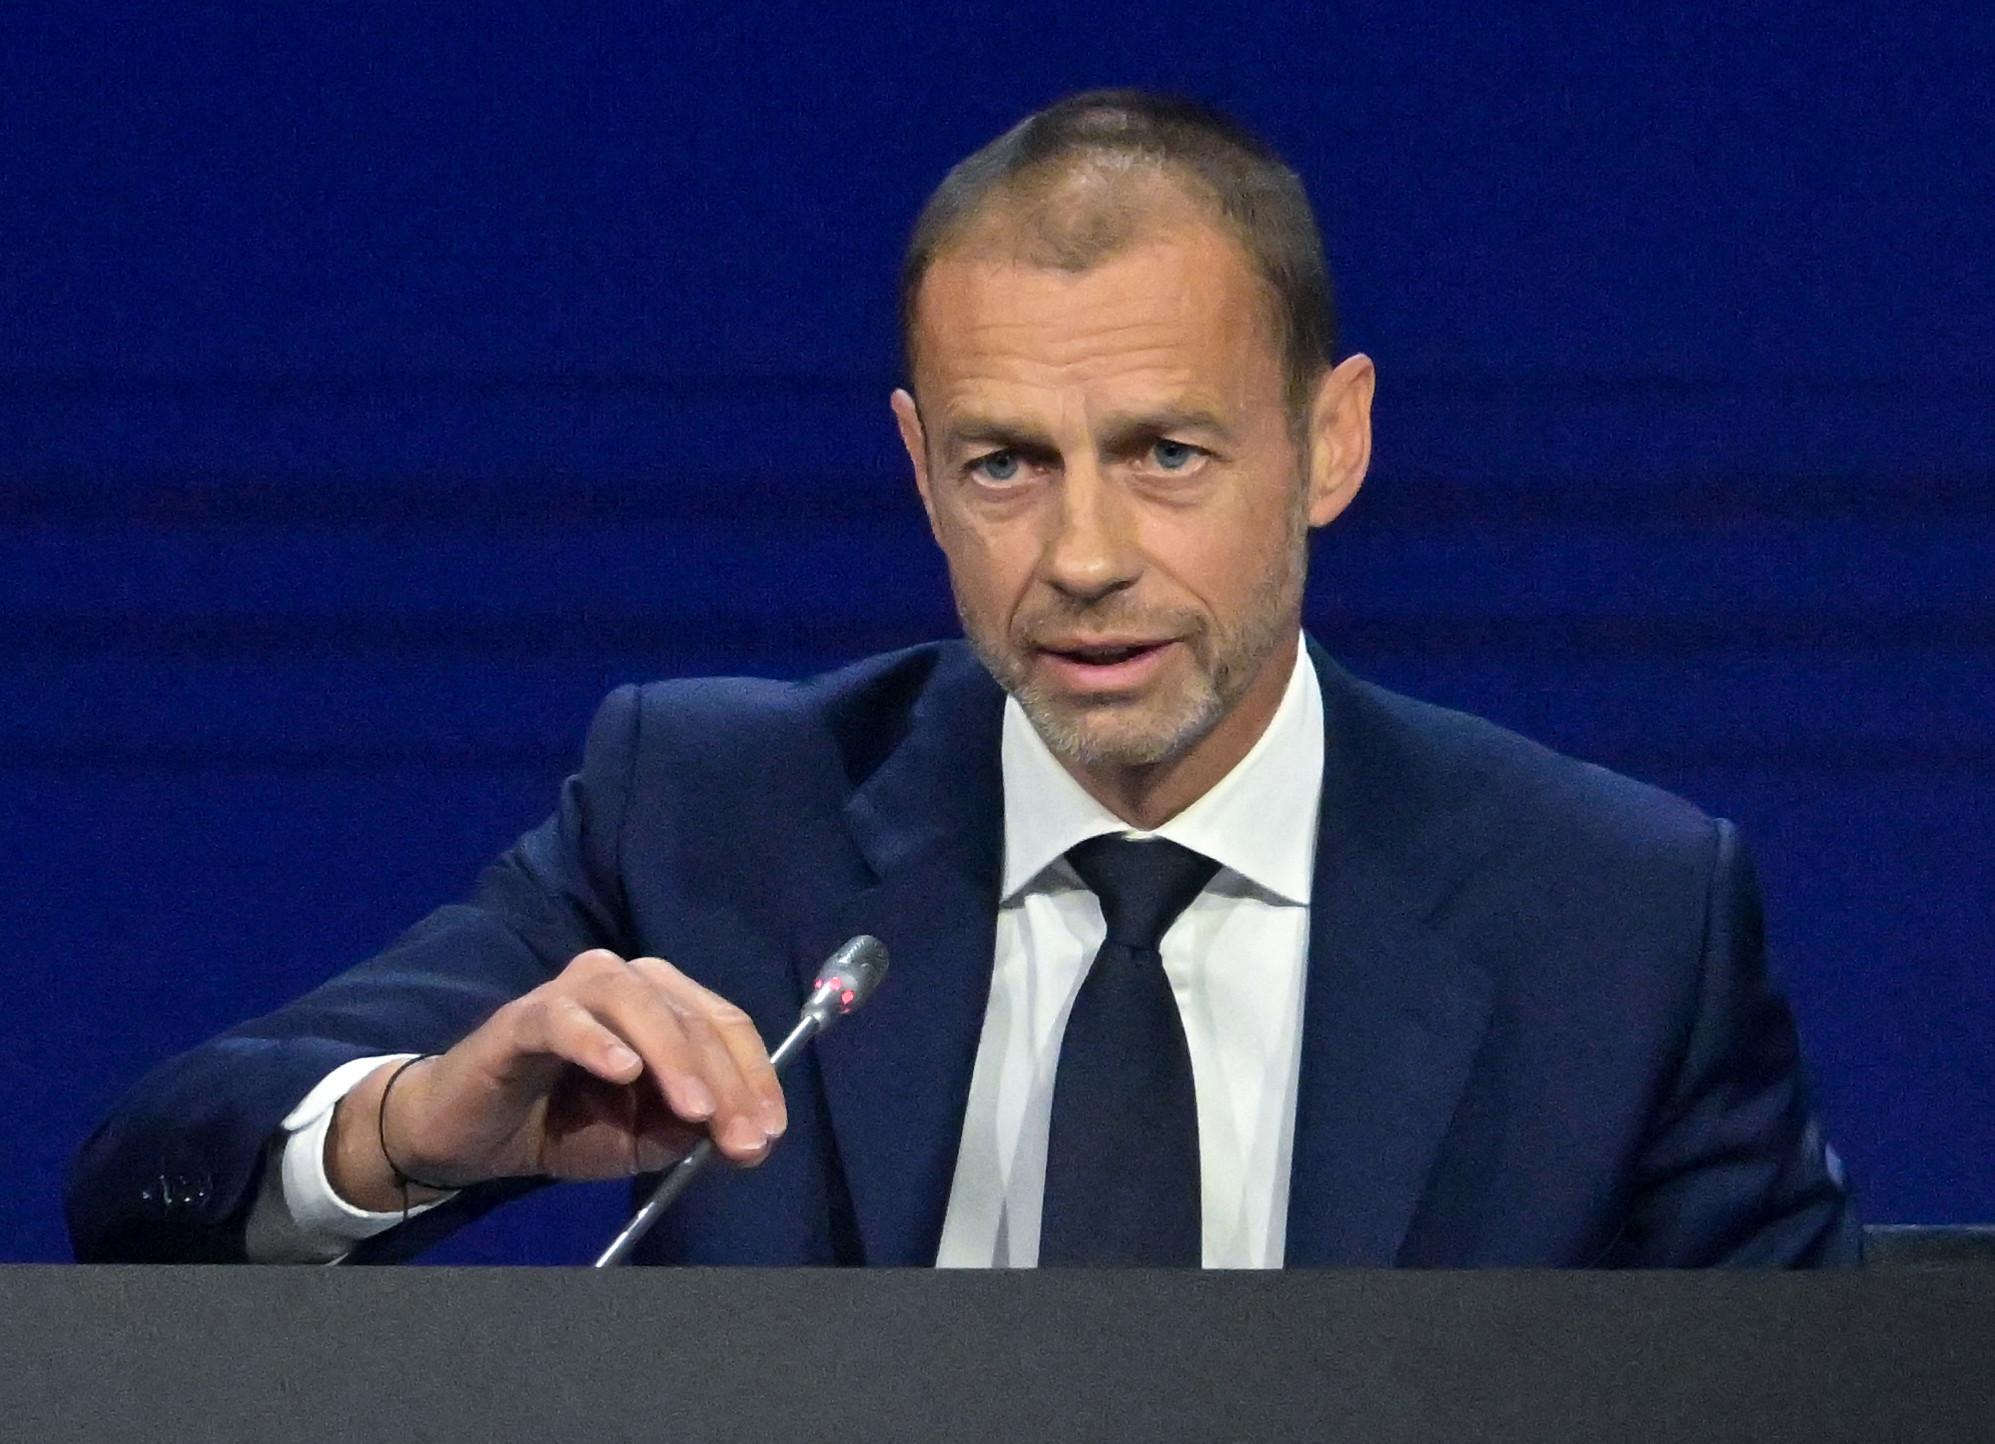 UEFA President Aleksander Čeferin insisted the ties with CONMEBOL are "not an alliance against anyone" ©Getty Images